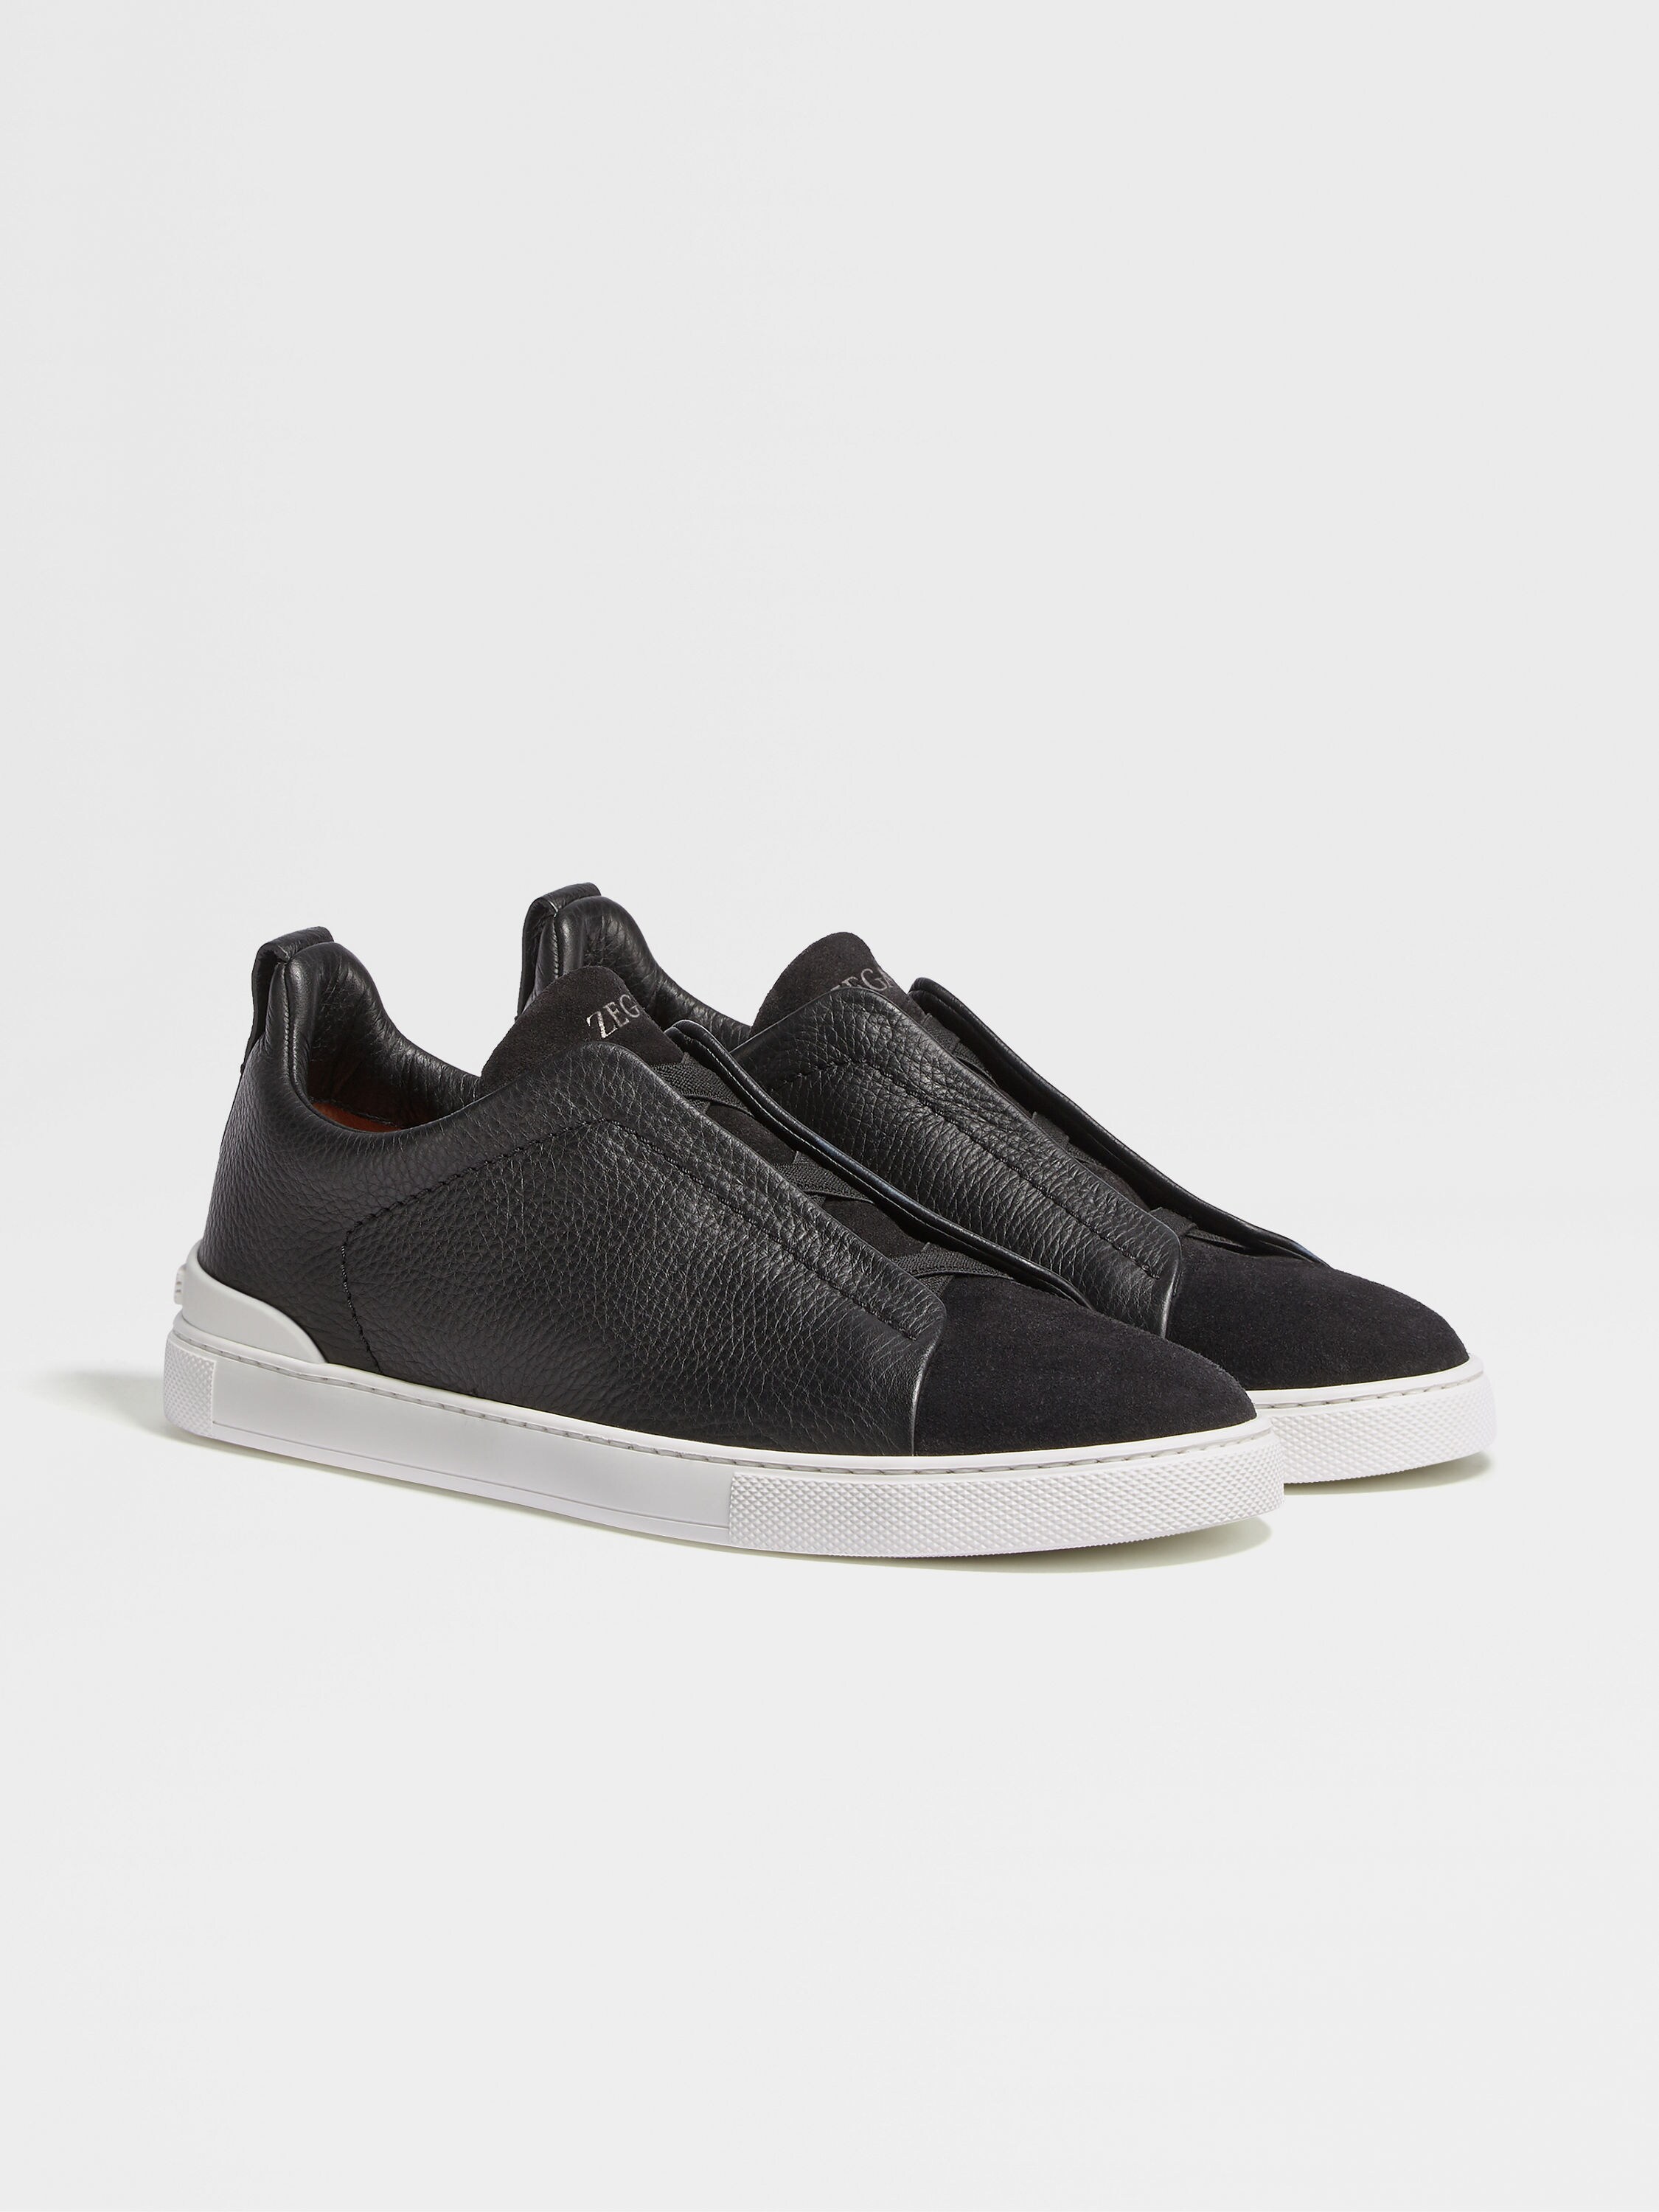 Black Leather and Suede Triple Stitch™ Sneakers